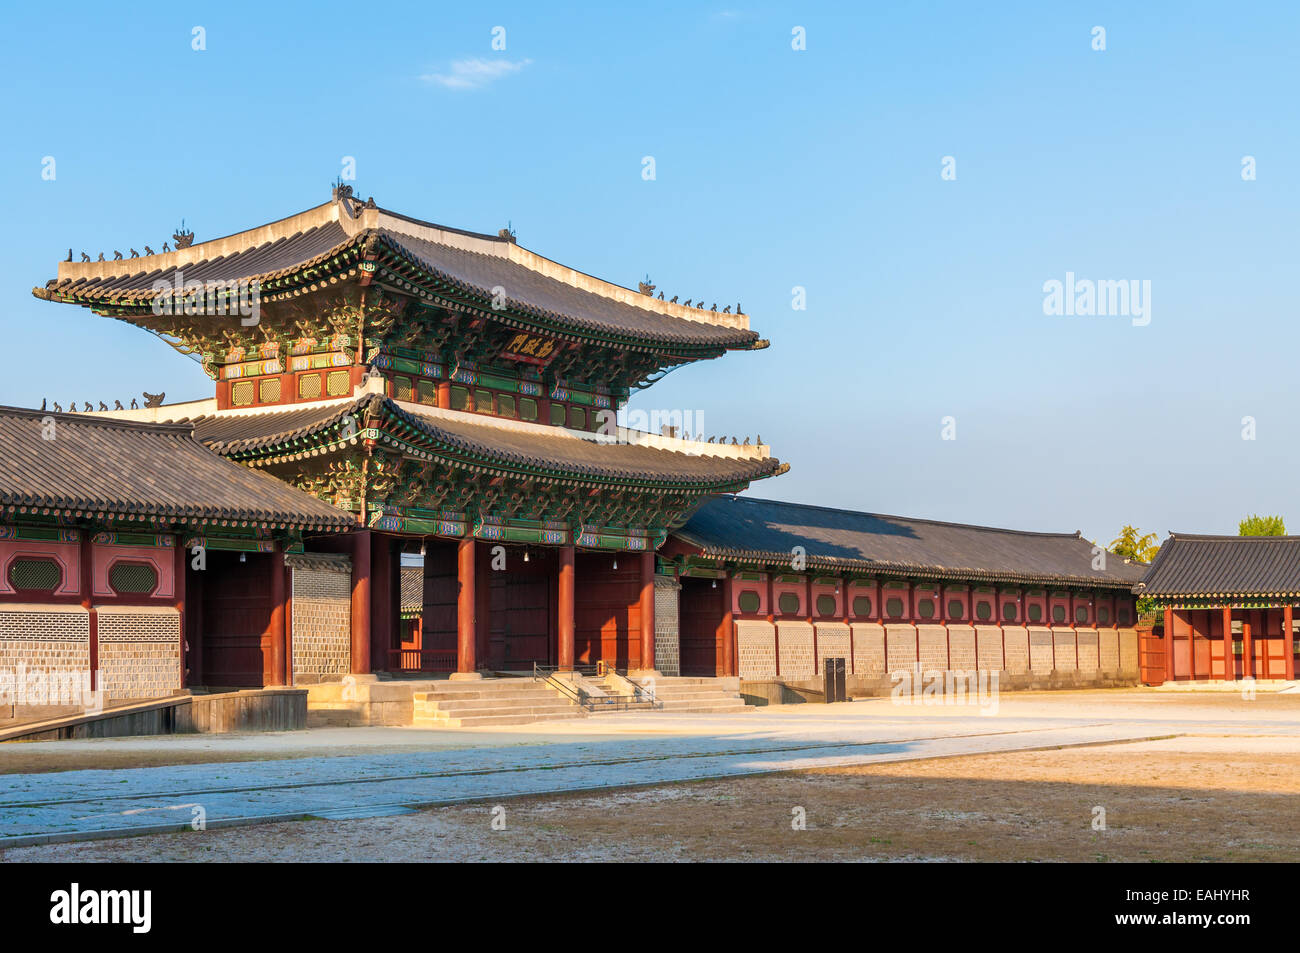 Traditional Korean architecture at Gyeongbokgung Palace in Seoul, South ...